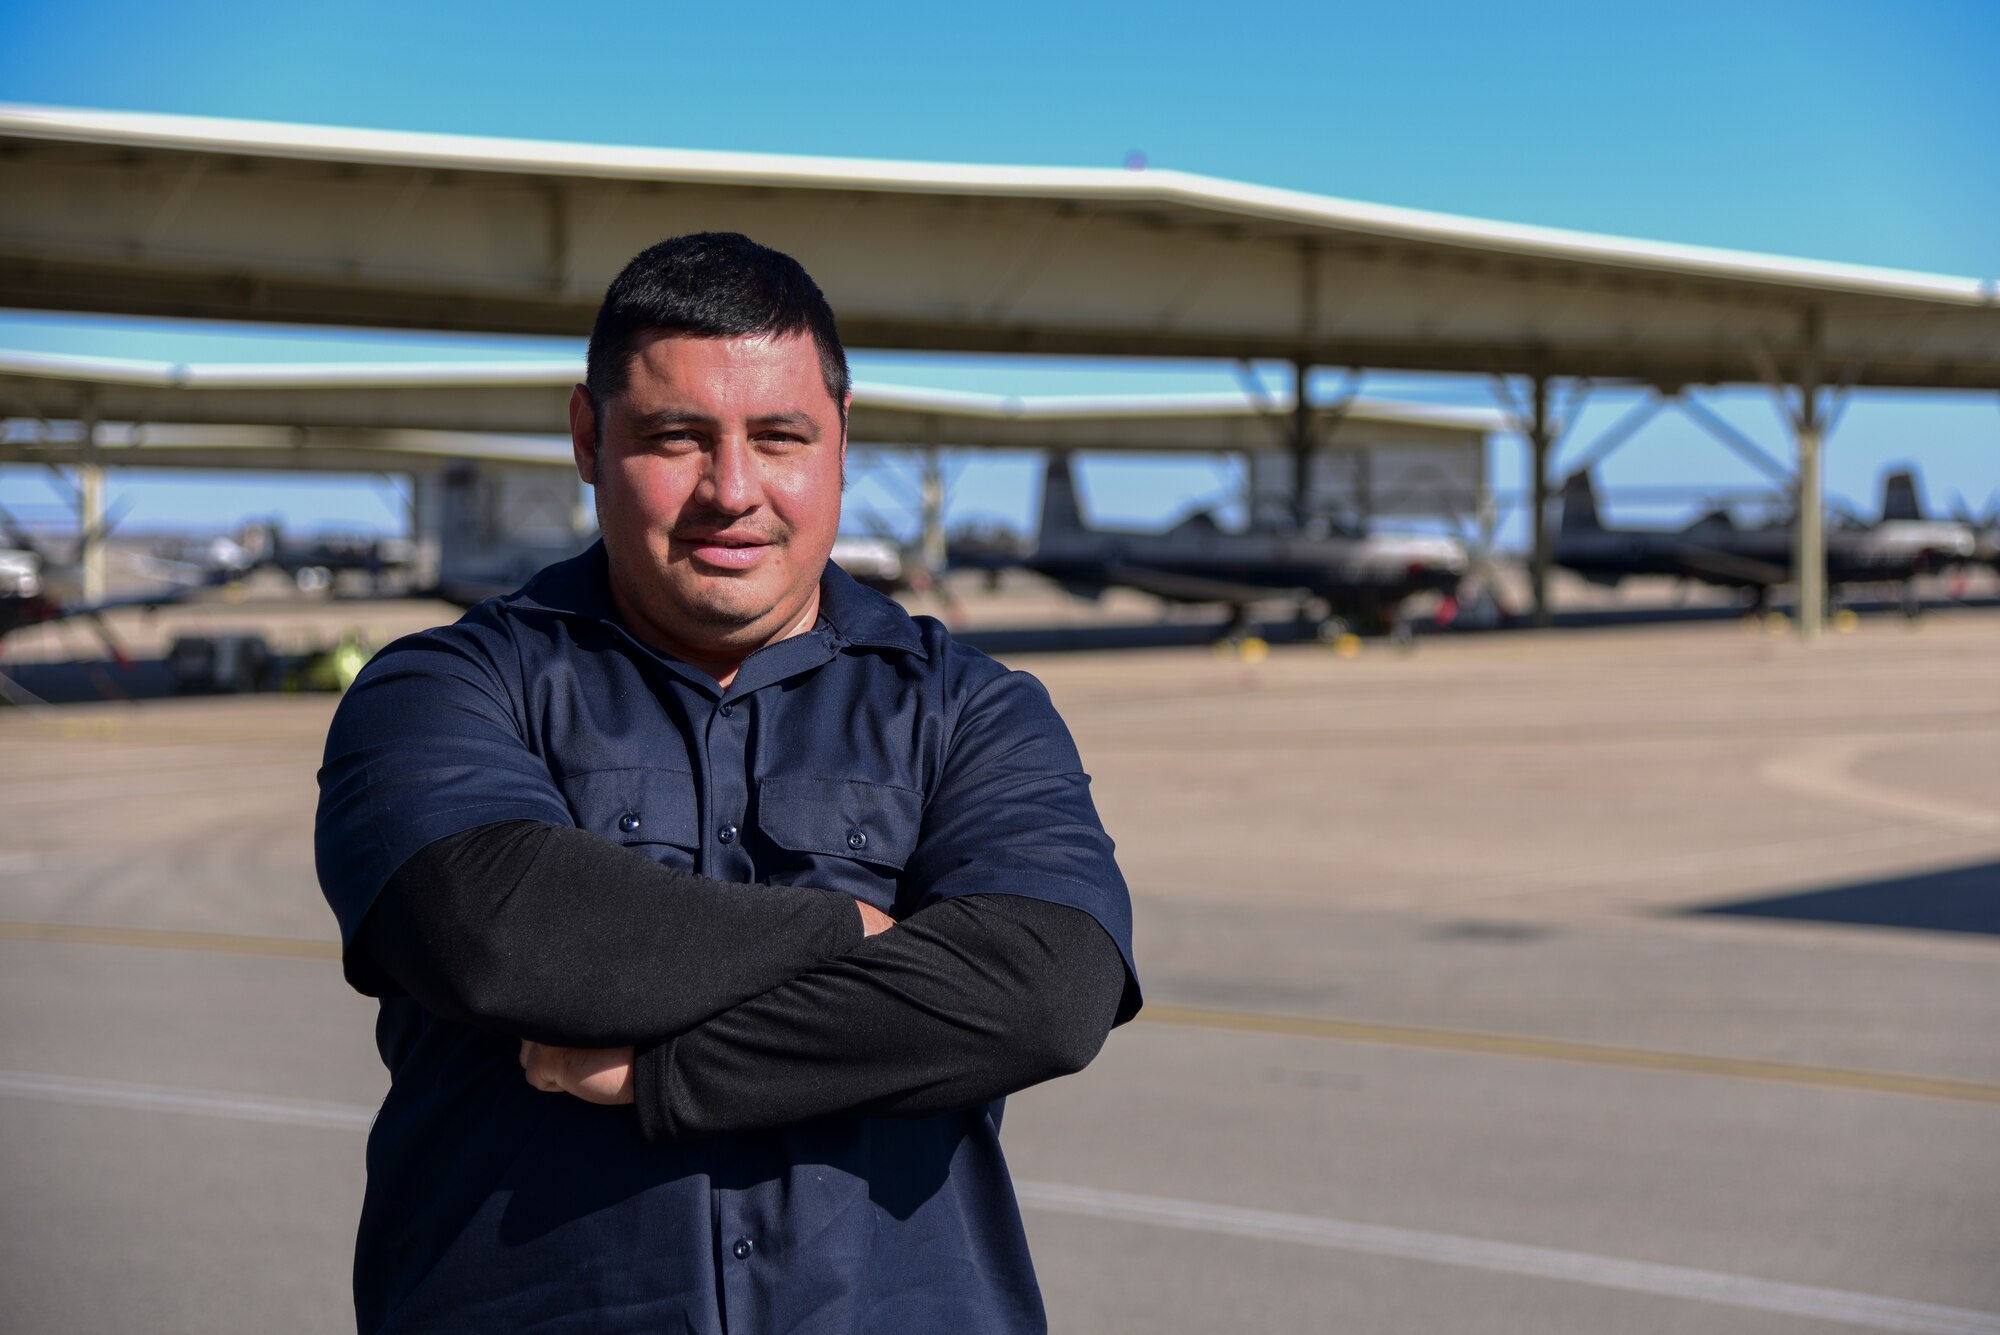 Rene Martinez, a 47th Maintenance Squadron aircraft mechanic, was chosen by wing leadership to be the “XLer” of the Week, Feb. 3, 2020, at Laughlin Air Force Base, Texas. The “XLer” award, presented by Col. Lee Gentile, 47th Flying Training Wing commander, and Chief Master Sgt. Robert L. Zackery III, 47th FTW command chief master sergeant, is given to those who consistently make outstanding contributions to their unit and the Laughlin mission. (U.S. Air Force photo by Senior Airman Anne McCready)